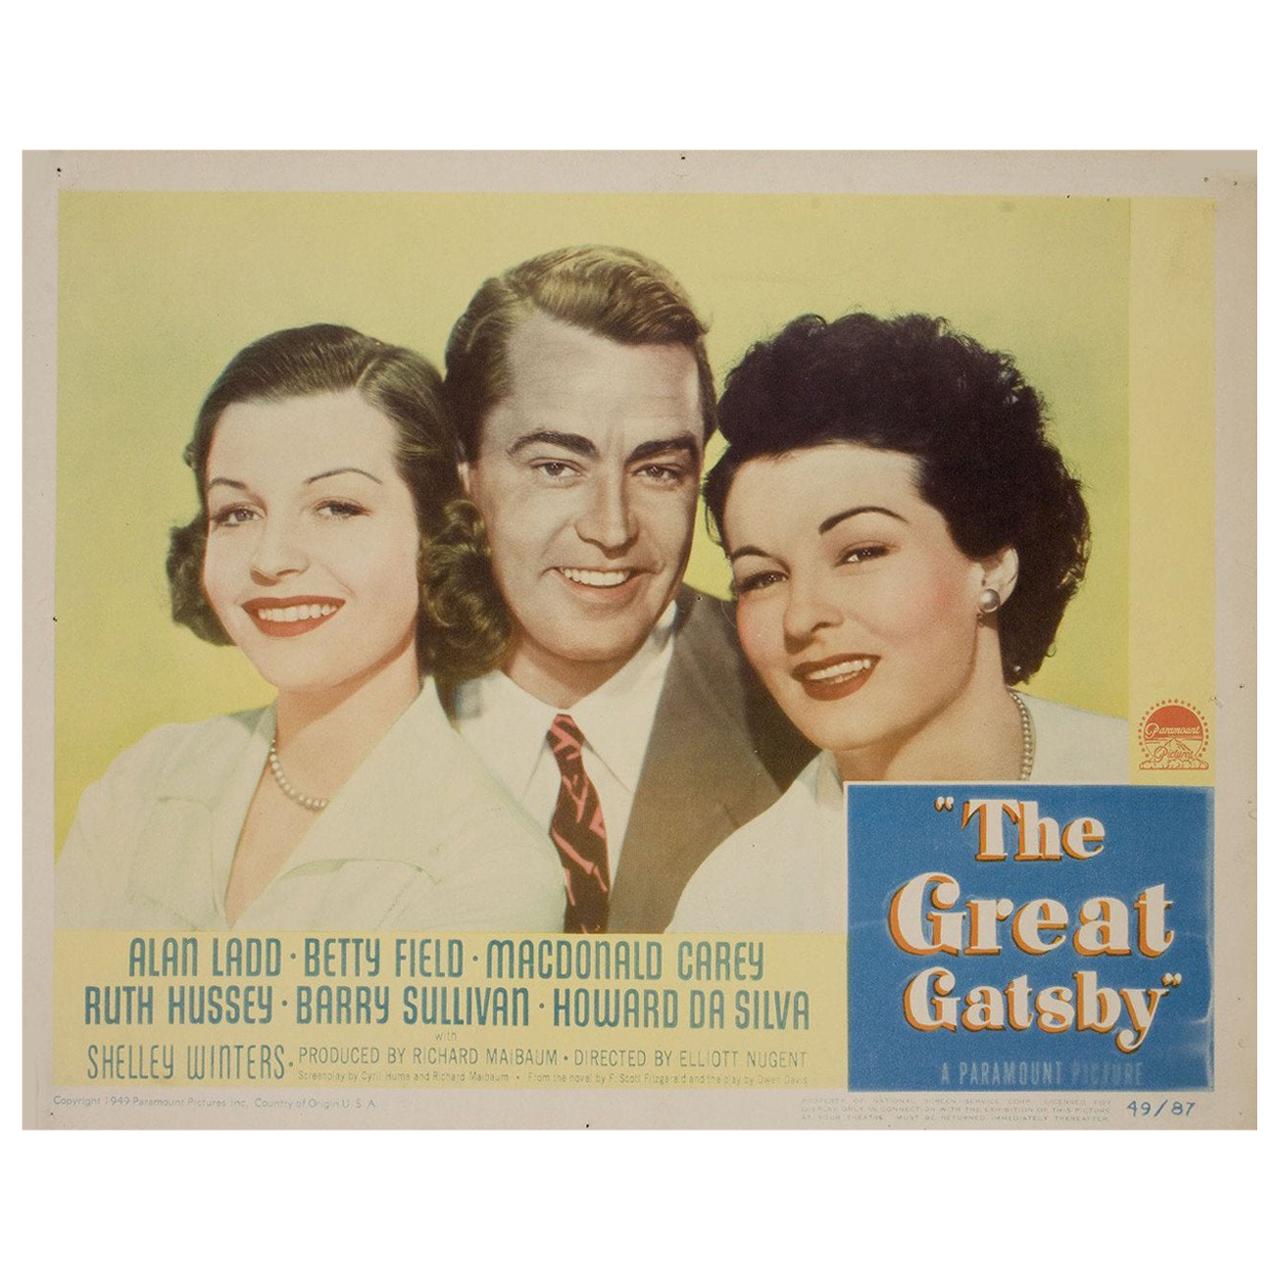 "The Great Gatsby" 1949 U.S. Scene Card For Sale